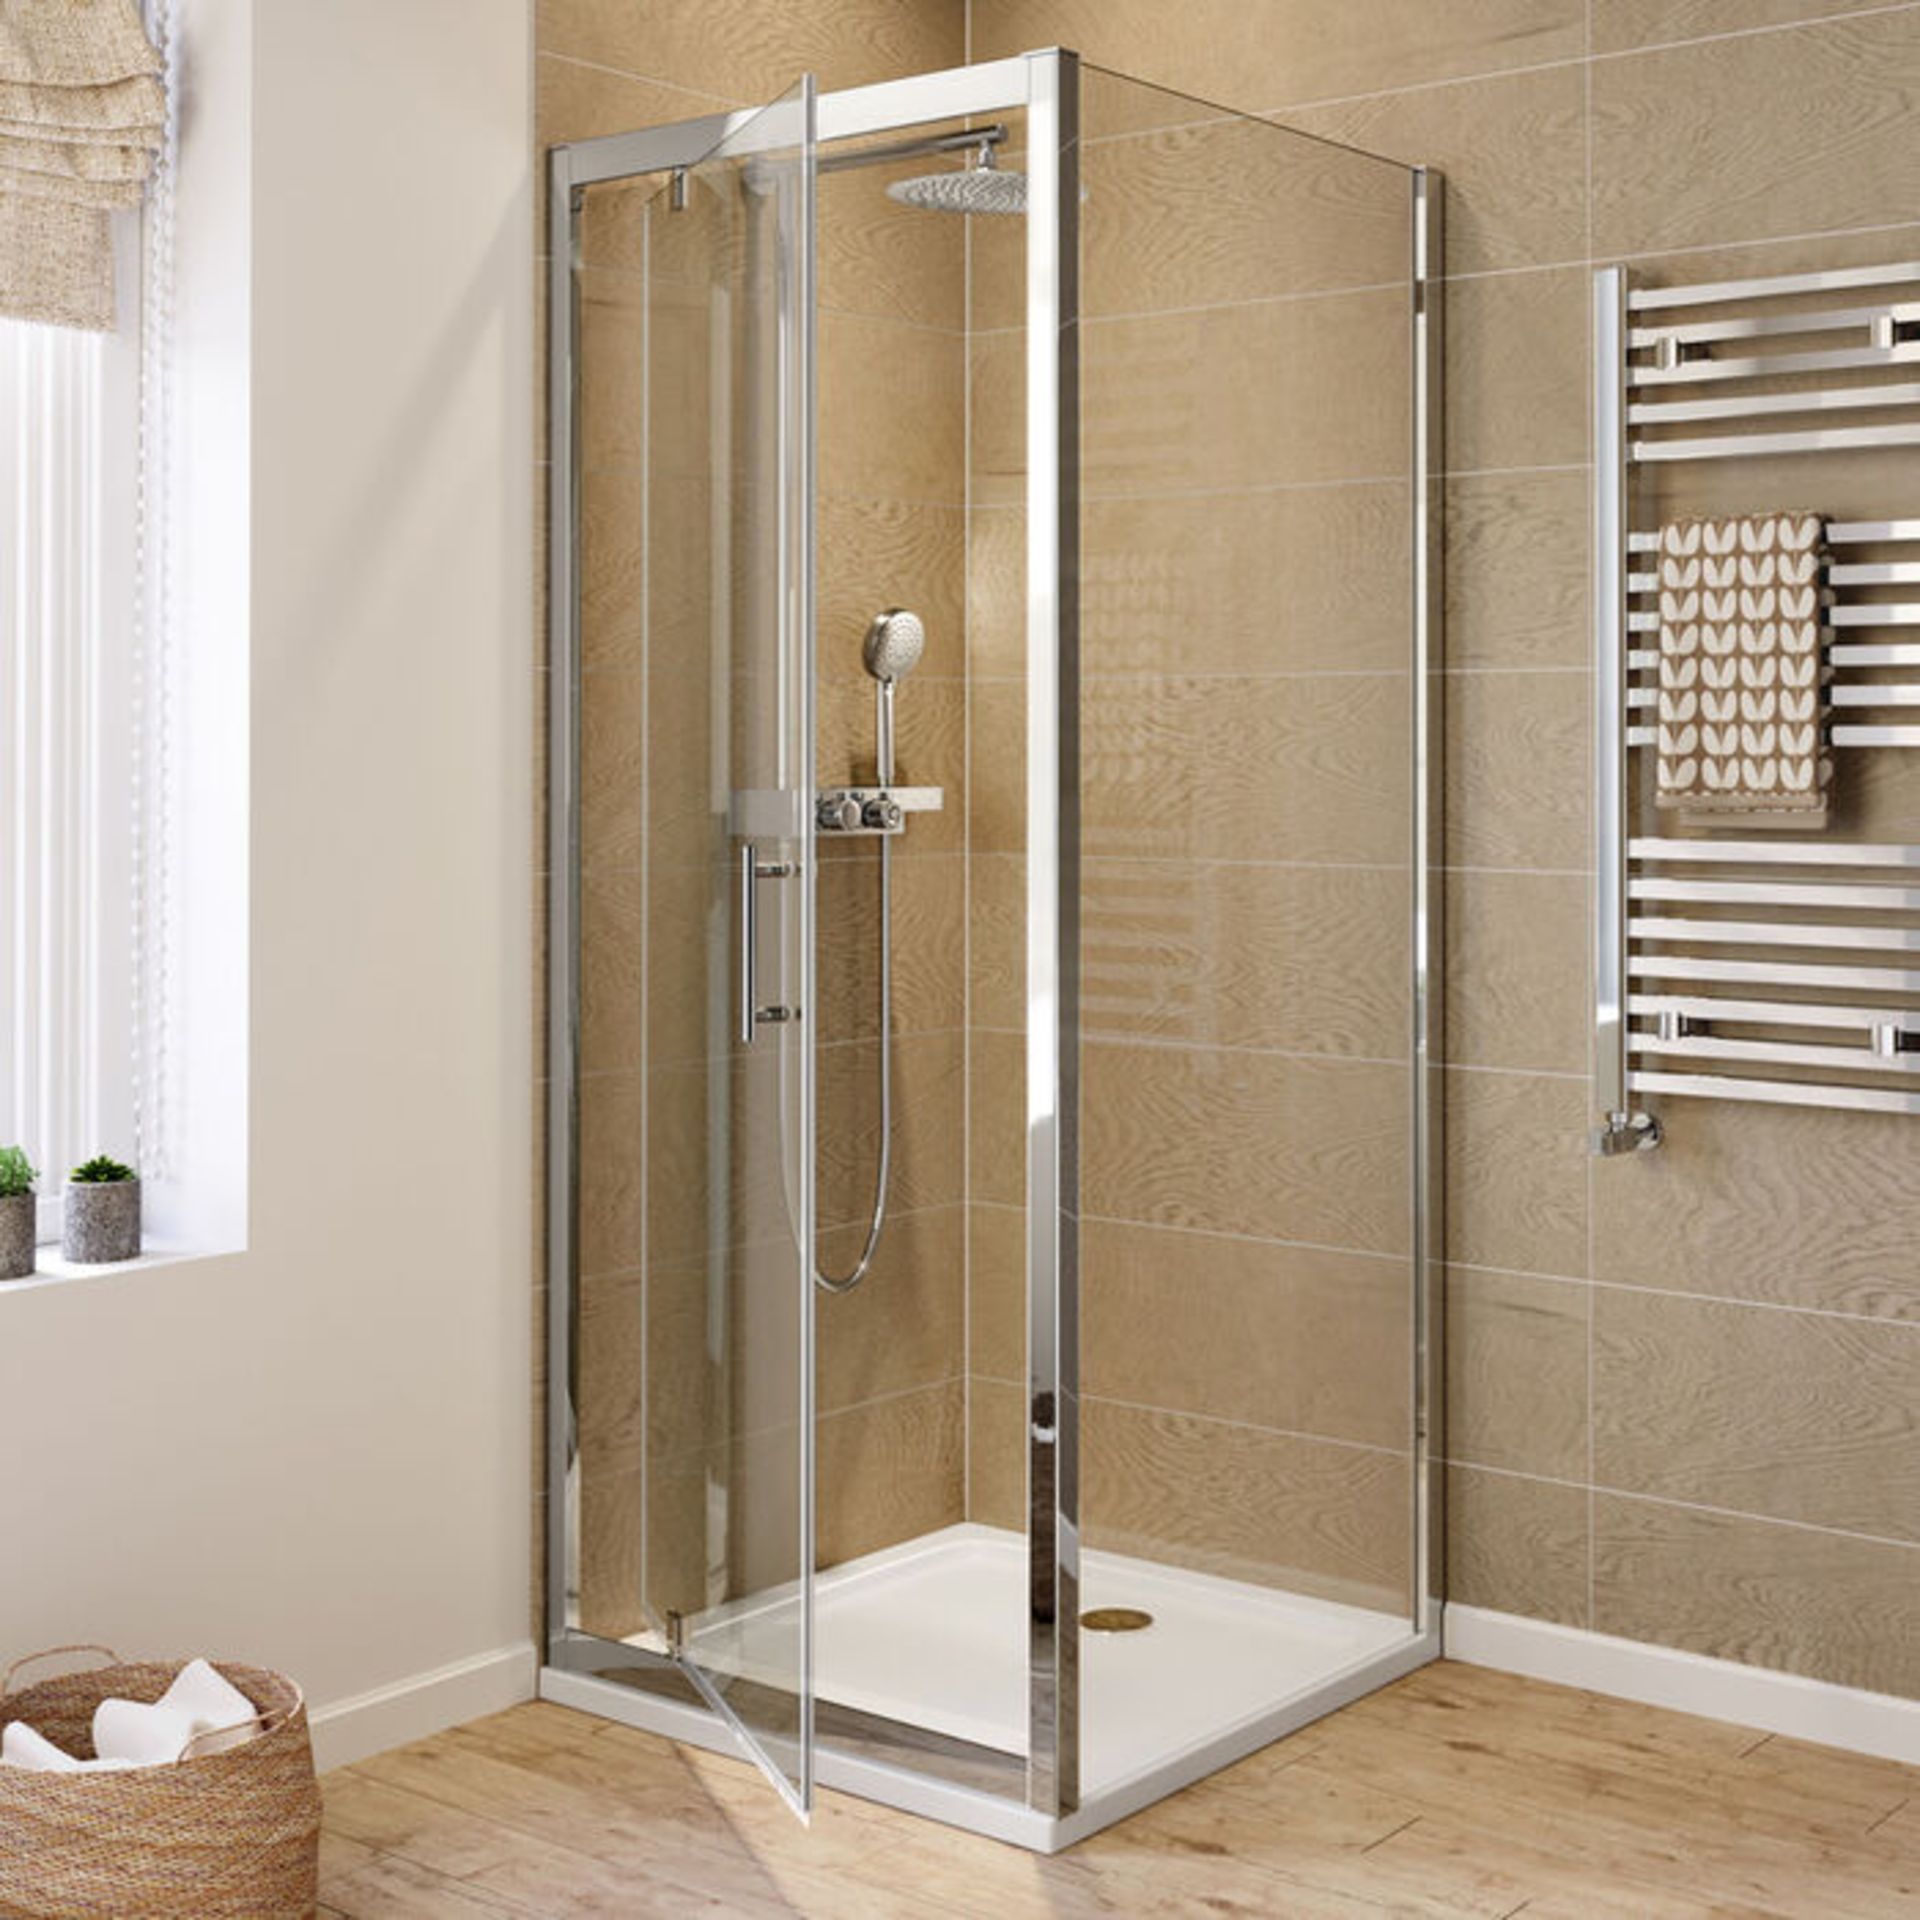 NEW 800x800mm - 6mm - Elements Pivot Door Shower Enclosure. RRP £330.99.6mm Safety Glass Full... - Image 2 of 3